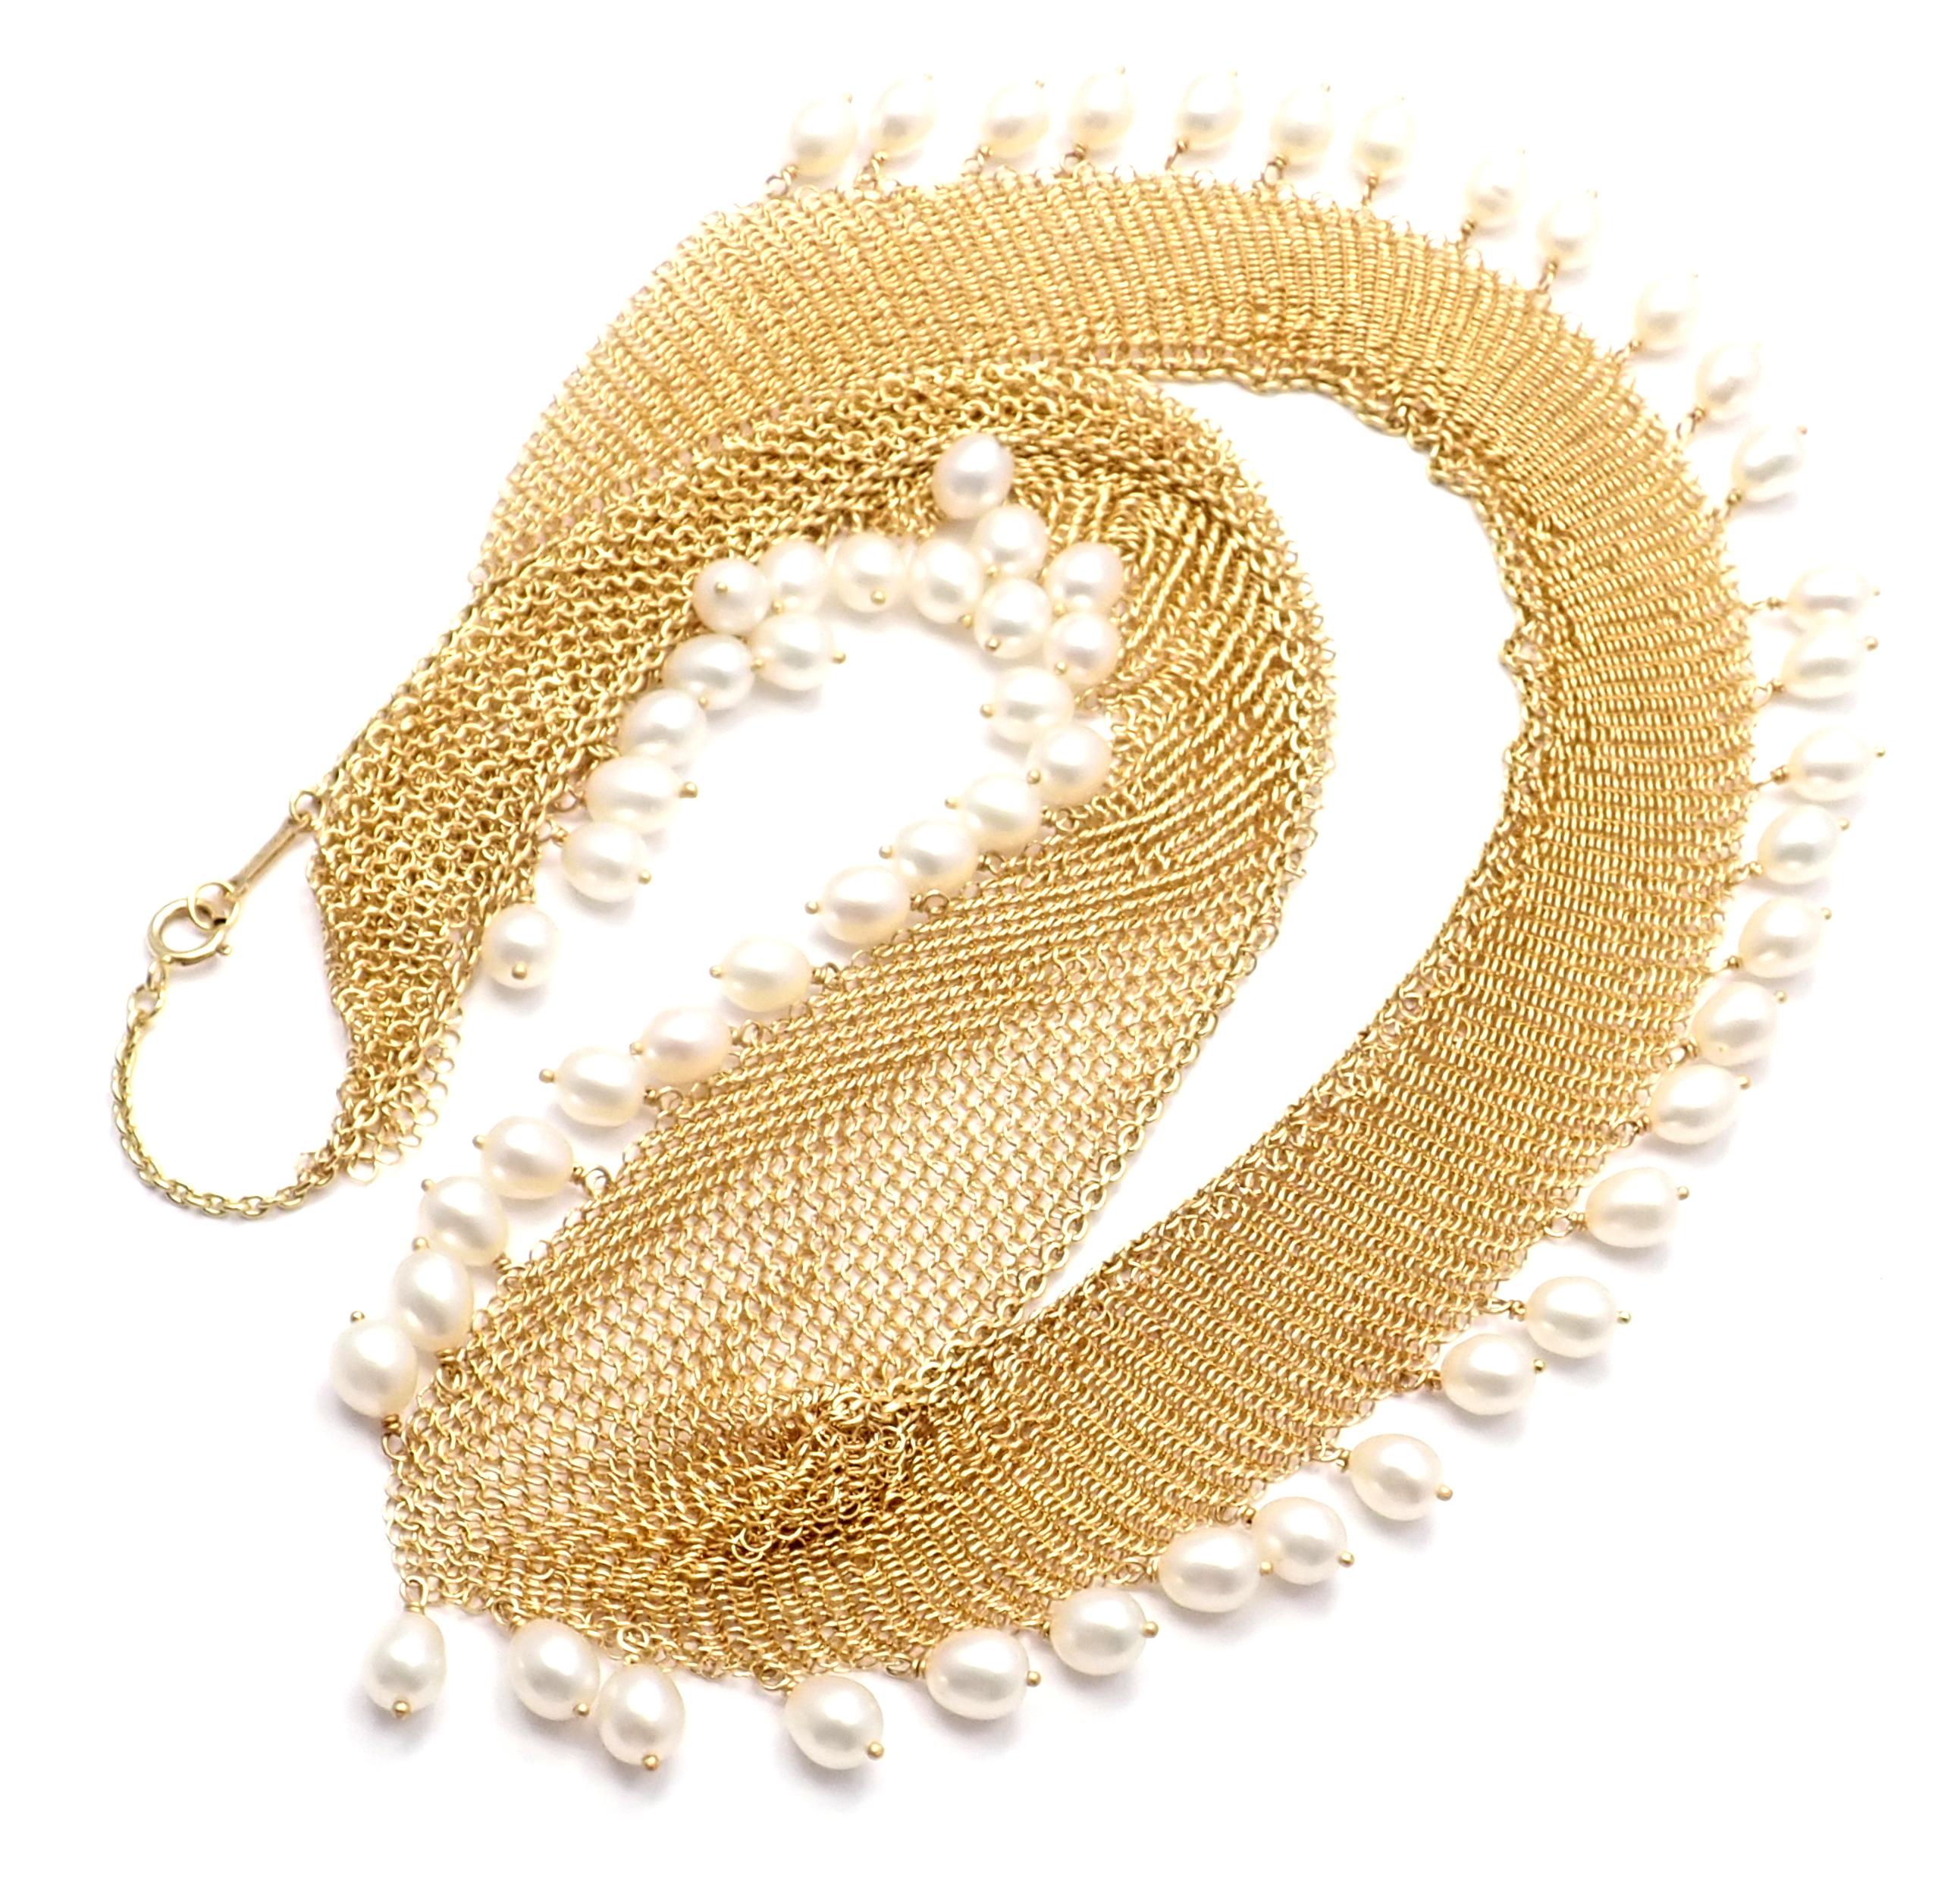 18k Yellow Gold Pearl Mesh Necklace by Elsa Peretti for Tiffany & Co. 
With 62 Pearls from 5mm to 4.5mm.
Details:
Length: 16